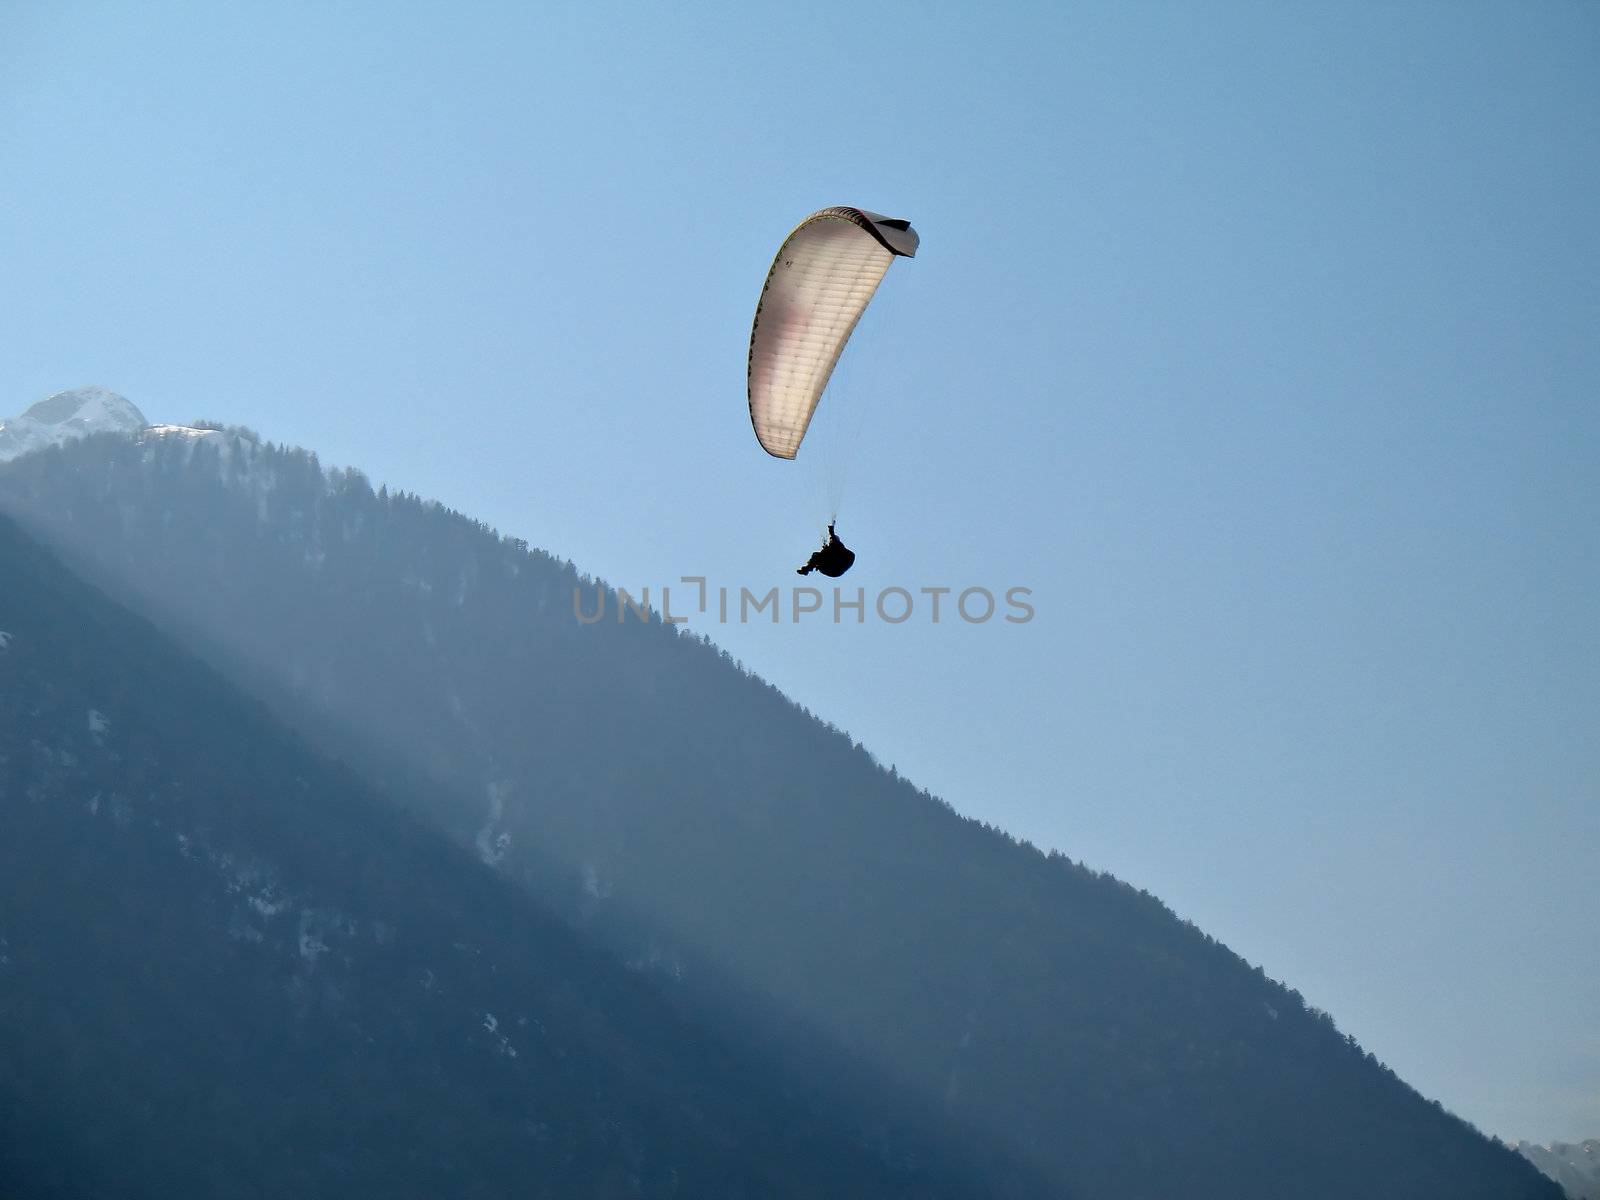 A paraglider il flying in the blue sky near a mountain with his paraglide